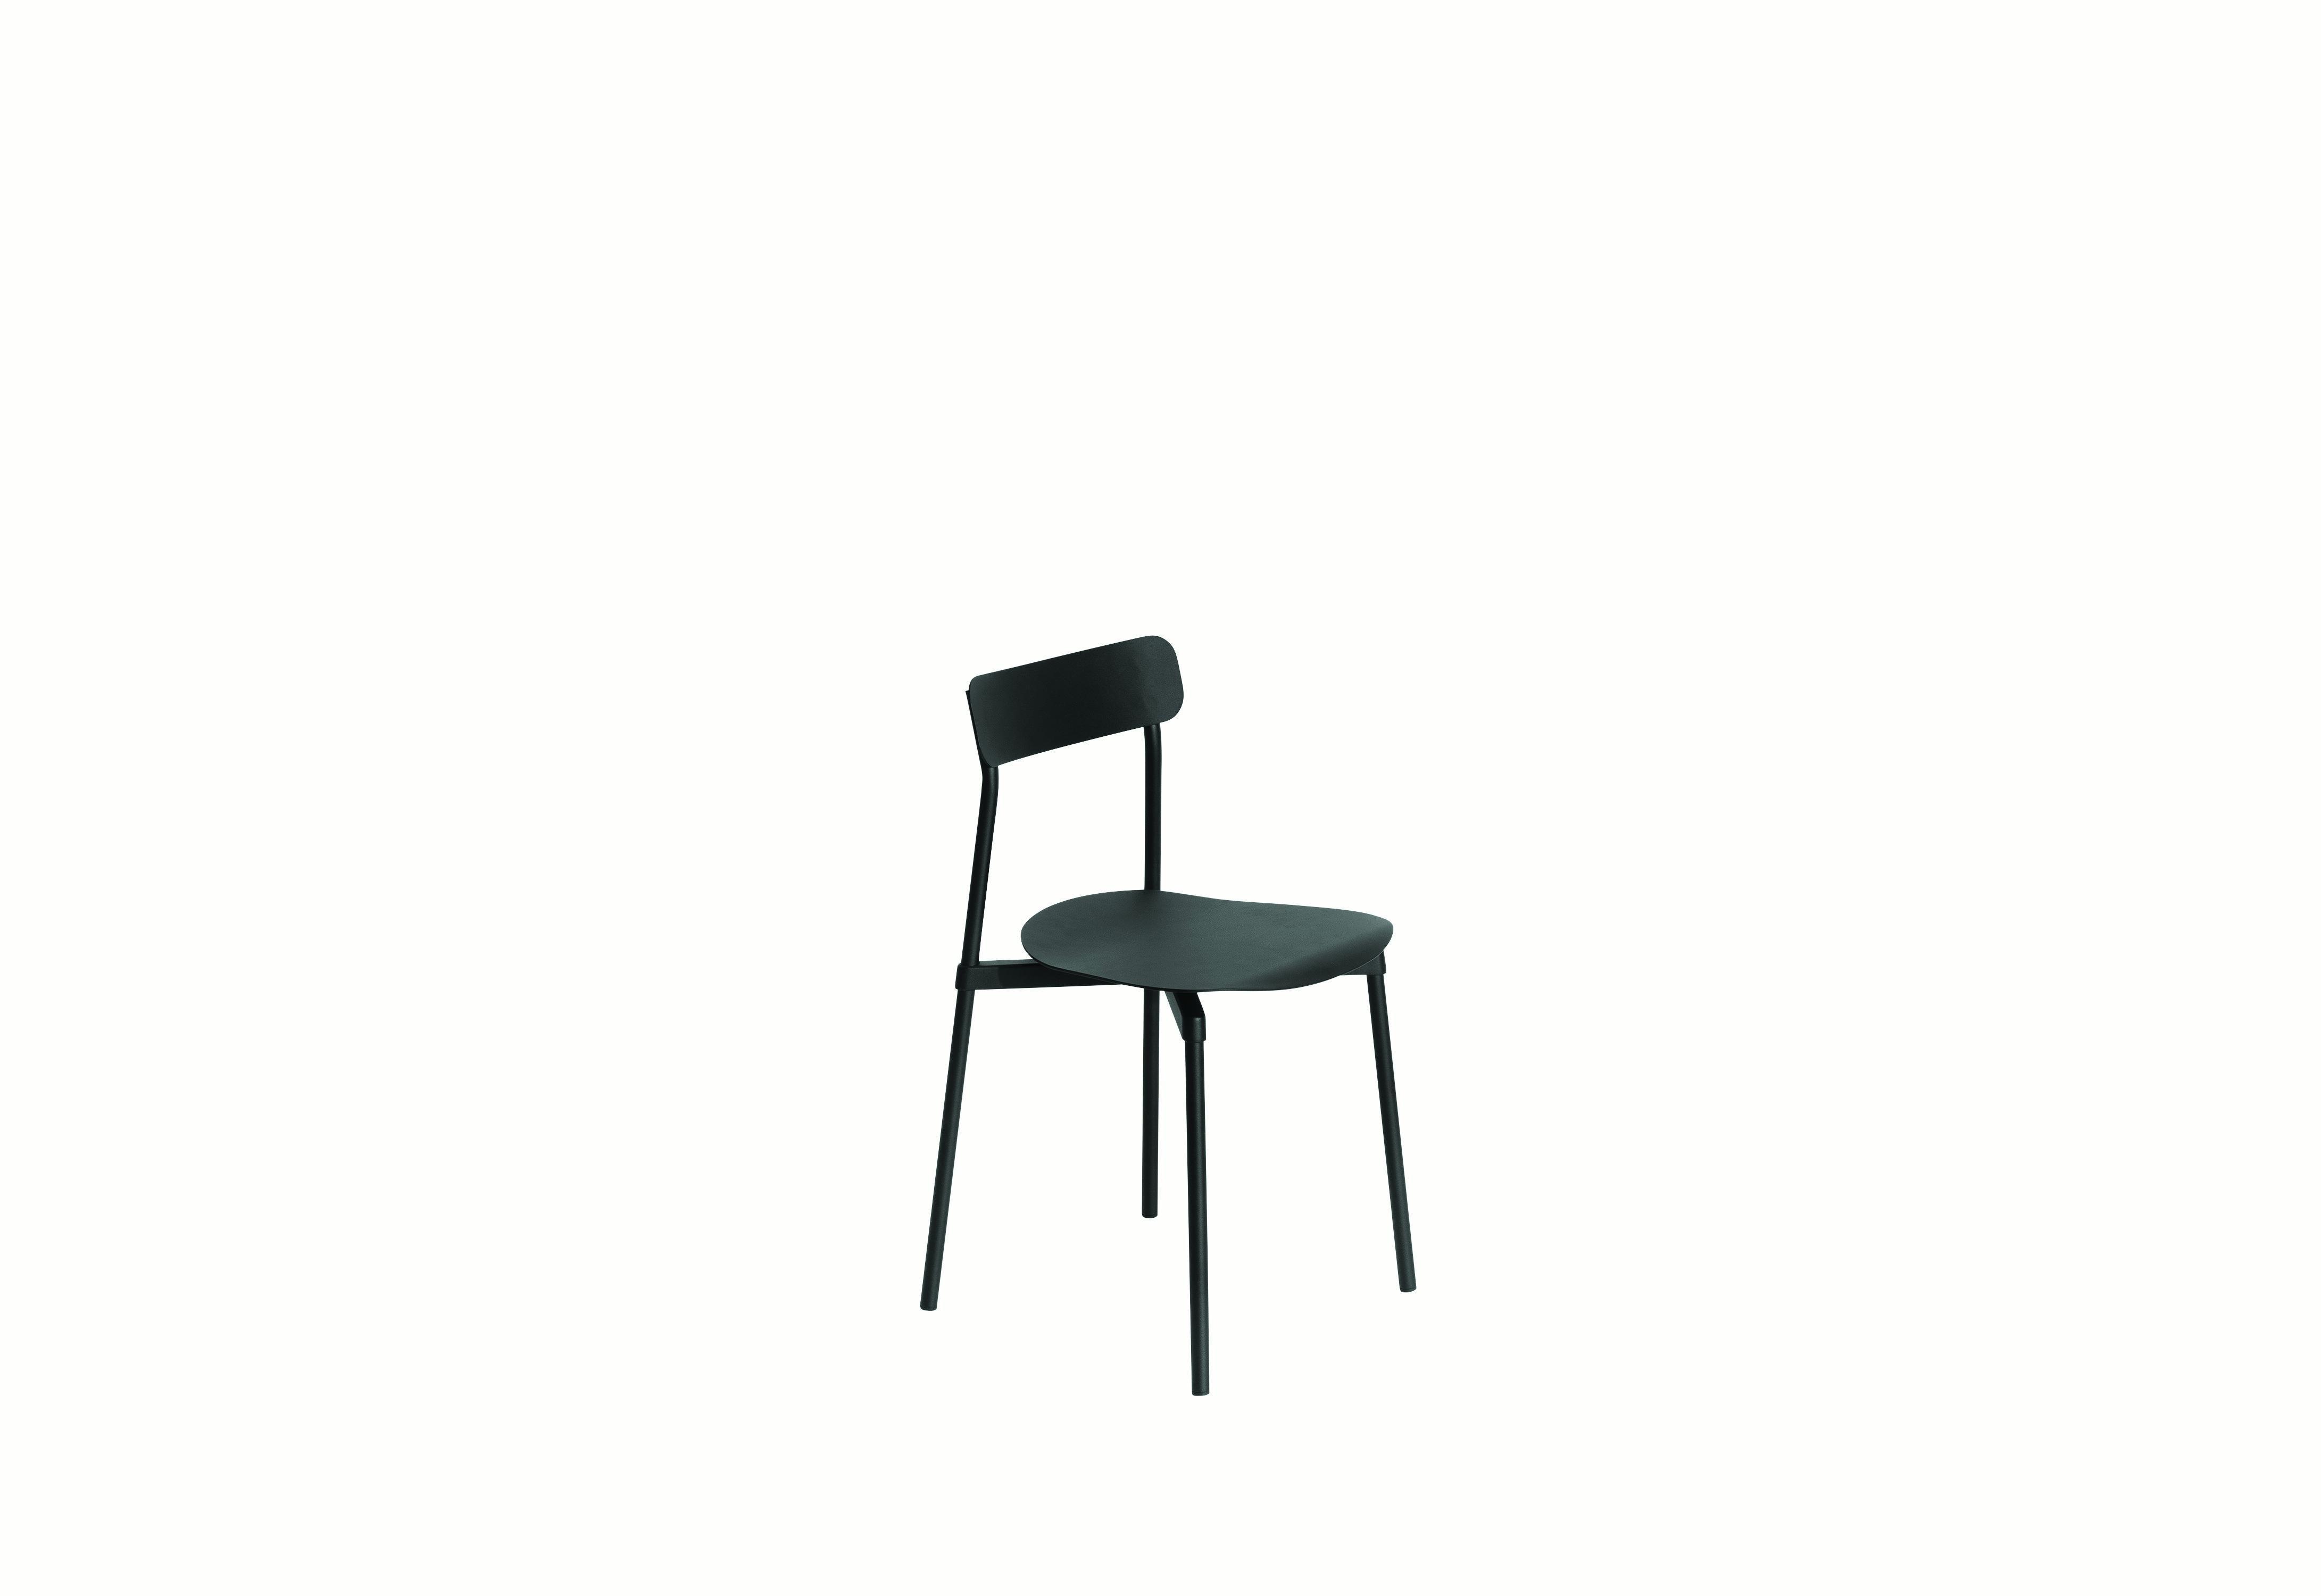 Petite Friture Fromme Chair in Black Aluminium by Tom Chung, 2019

The Fromme chair stands out by its pure line and compact design. Absorbers placed under the seating gives a soft and very comfortable flexibility to the chair. Made from aluminium,